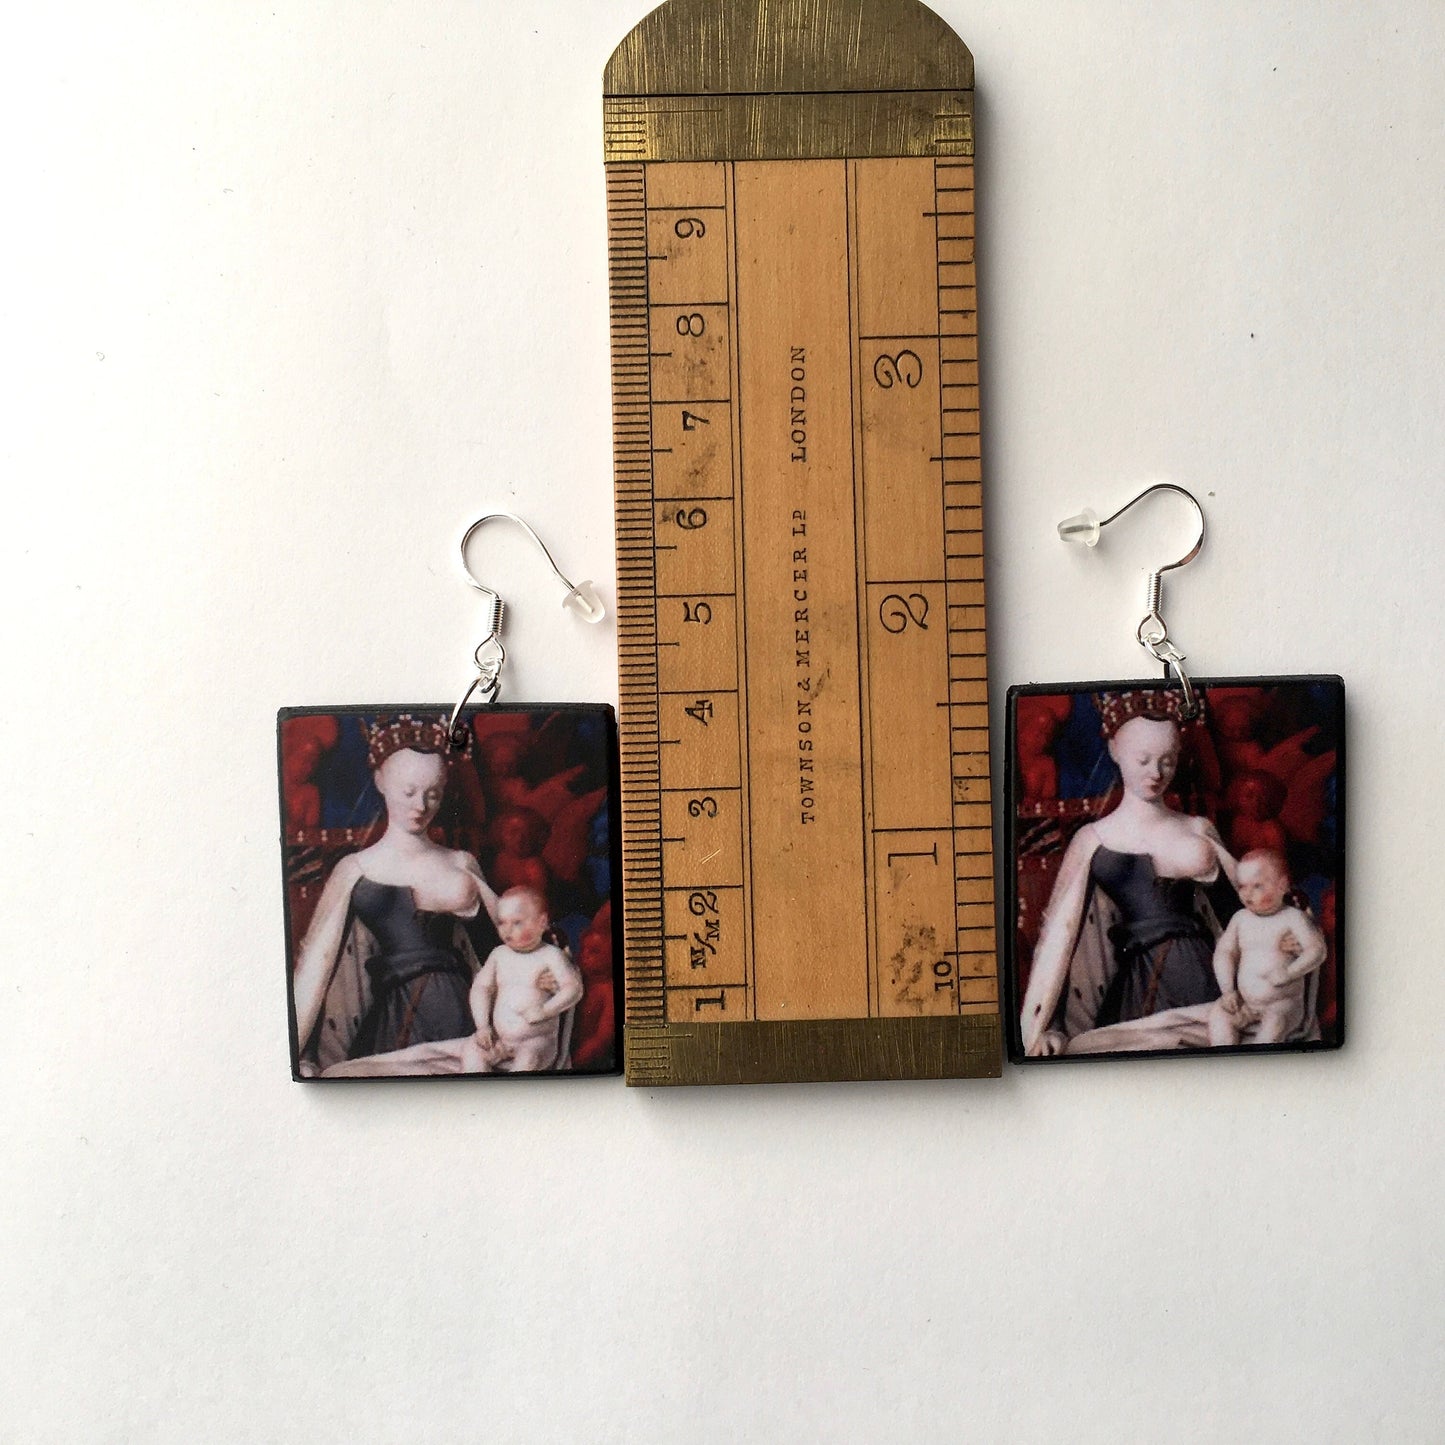 Madonna and child, sustainable wood and sterling earrings. Inspiration art . Mother gift.